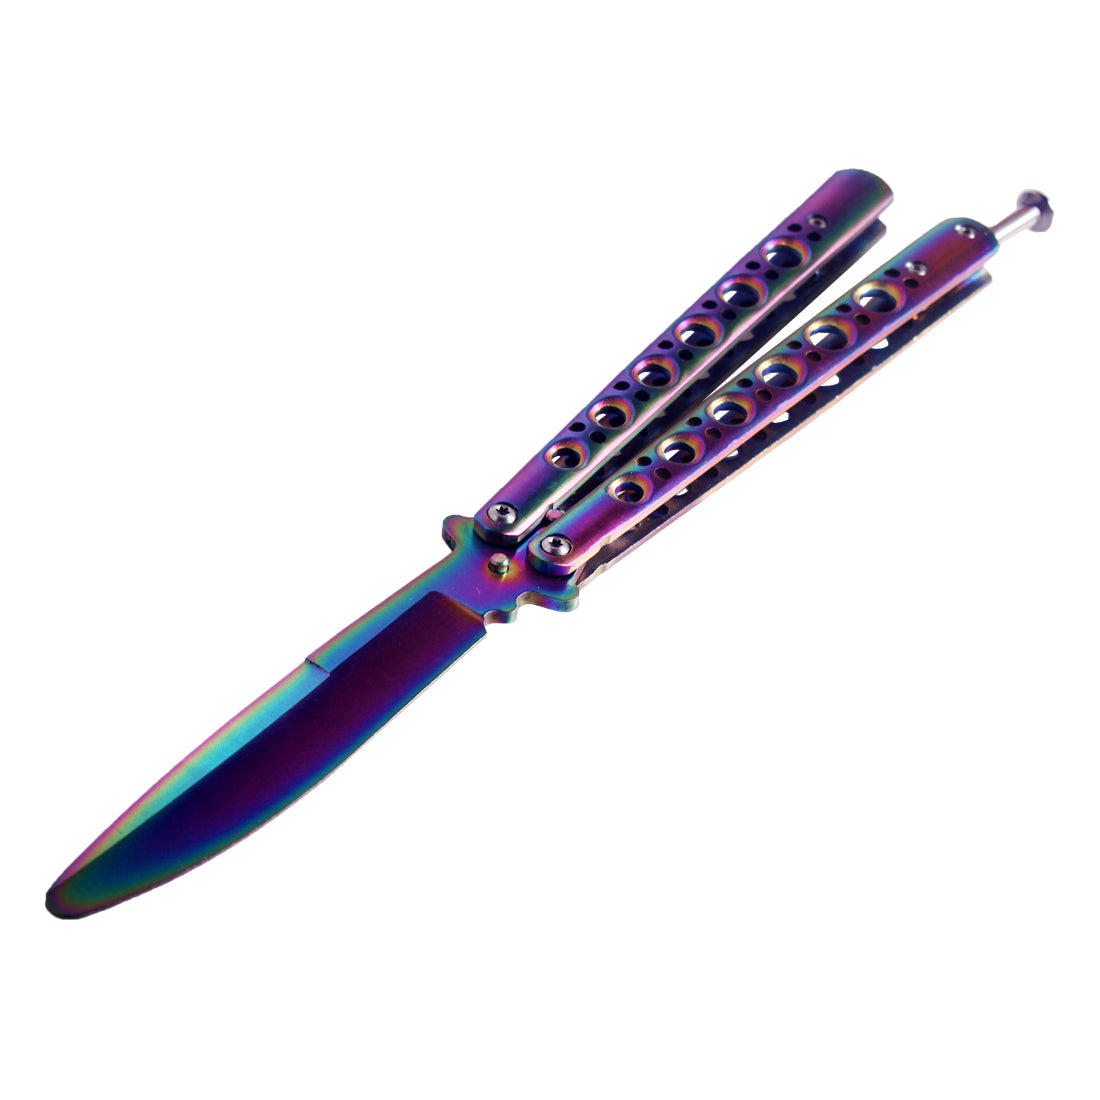 Andux Balisong Practice Trainer Blade Without Holes CS/HDD12